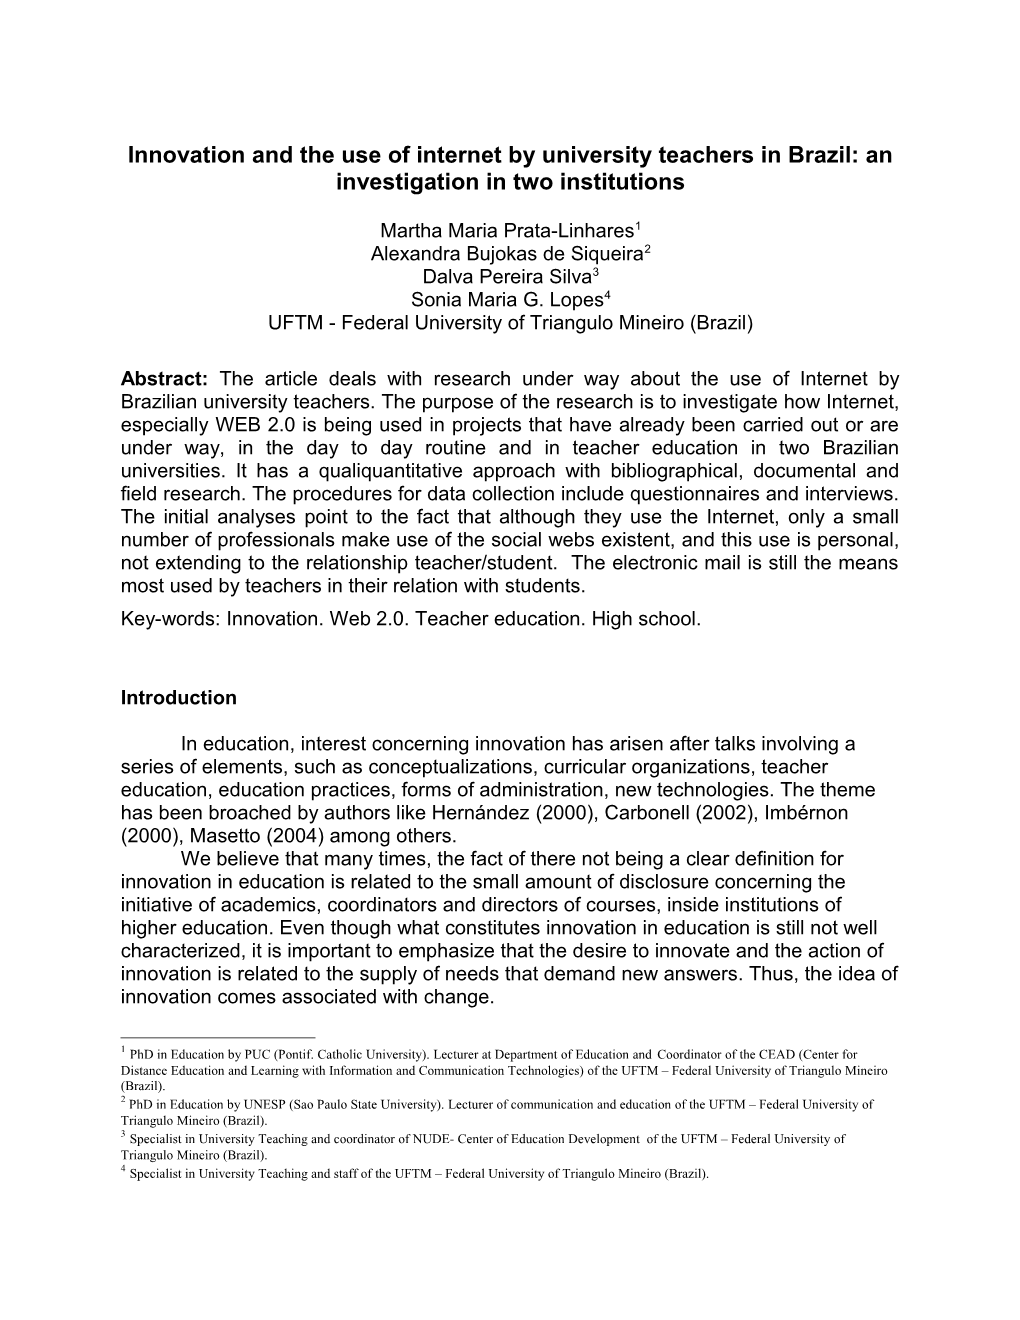 Innovation and the Use of Internet by University Teachers in Brazil: an Investigation In